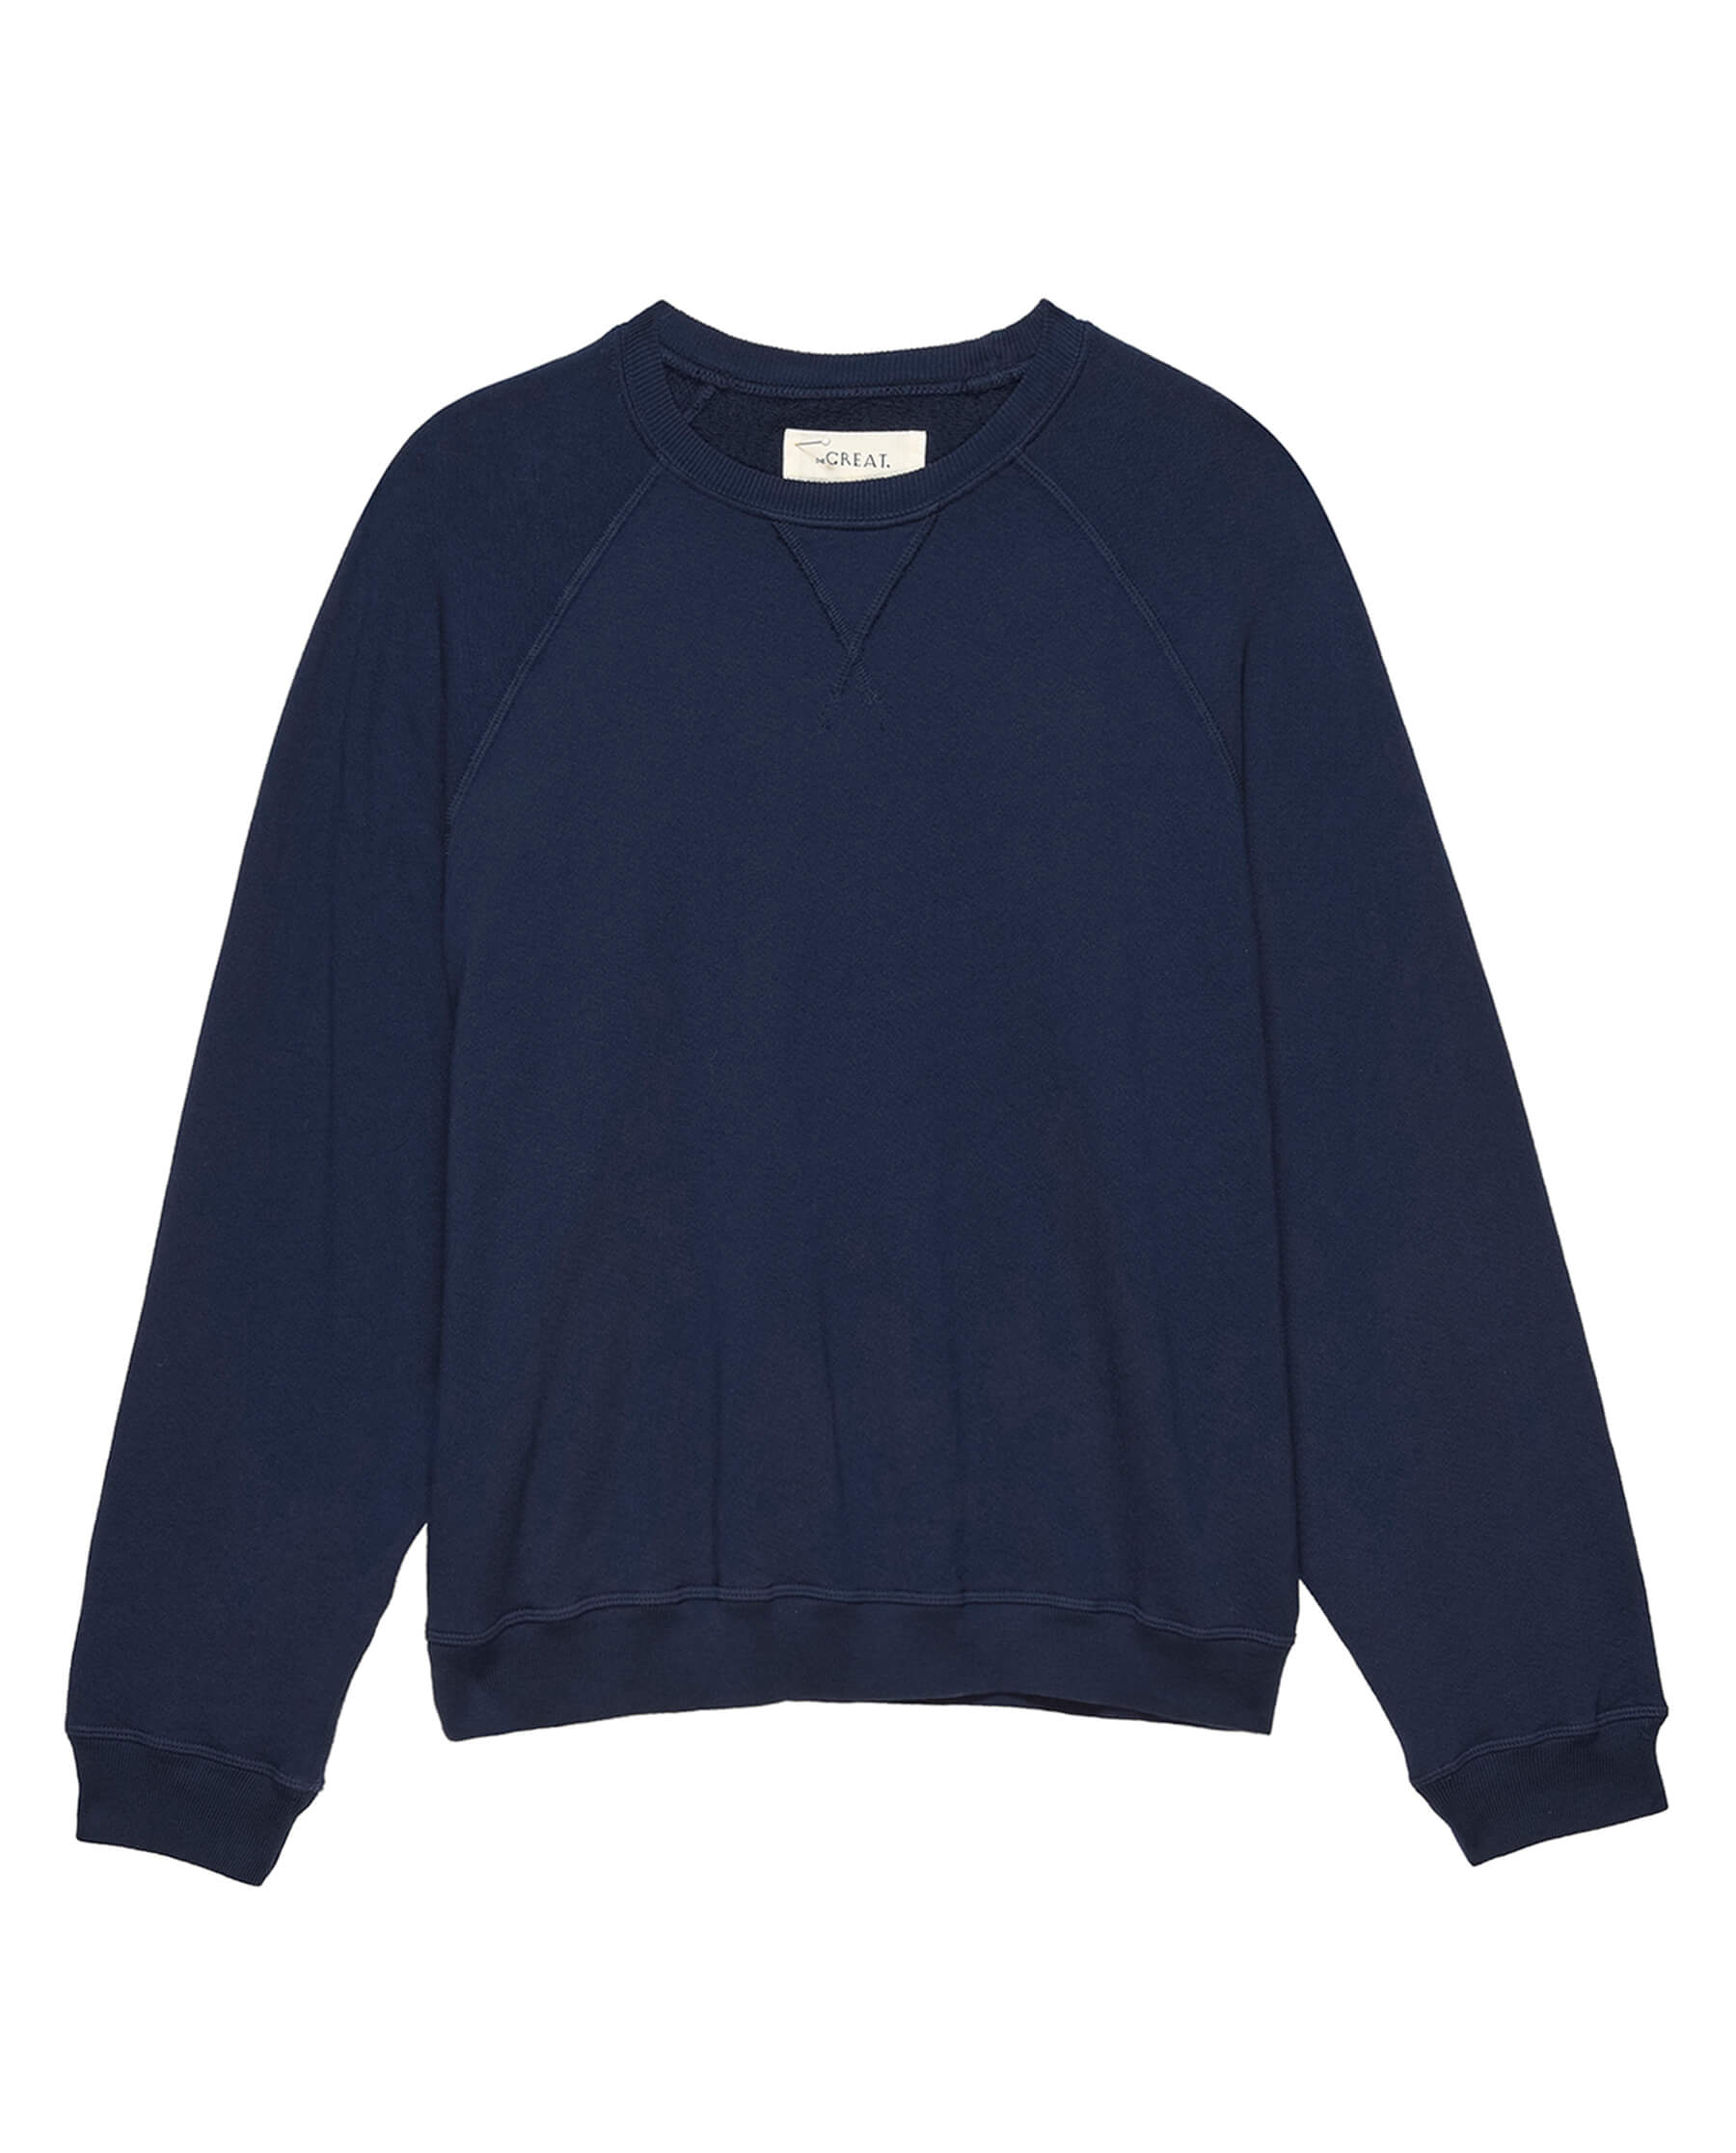 The Slouch Sweatshirt. Solid -- True Navy SWEATSHIRTS THE GREAT. FALL 23 KNITS